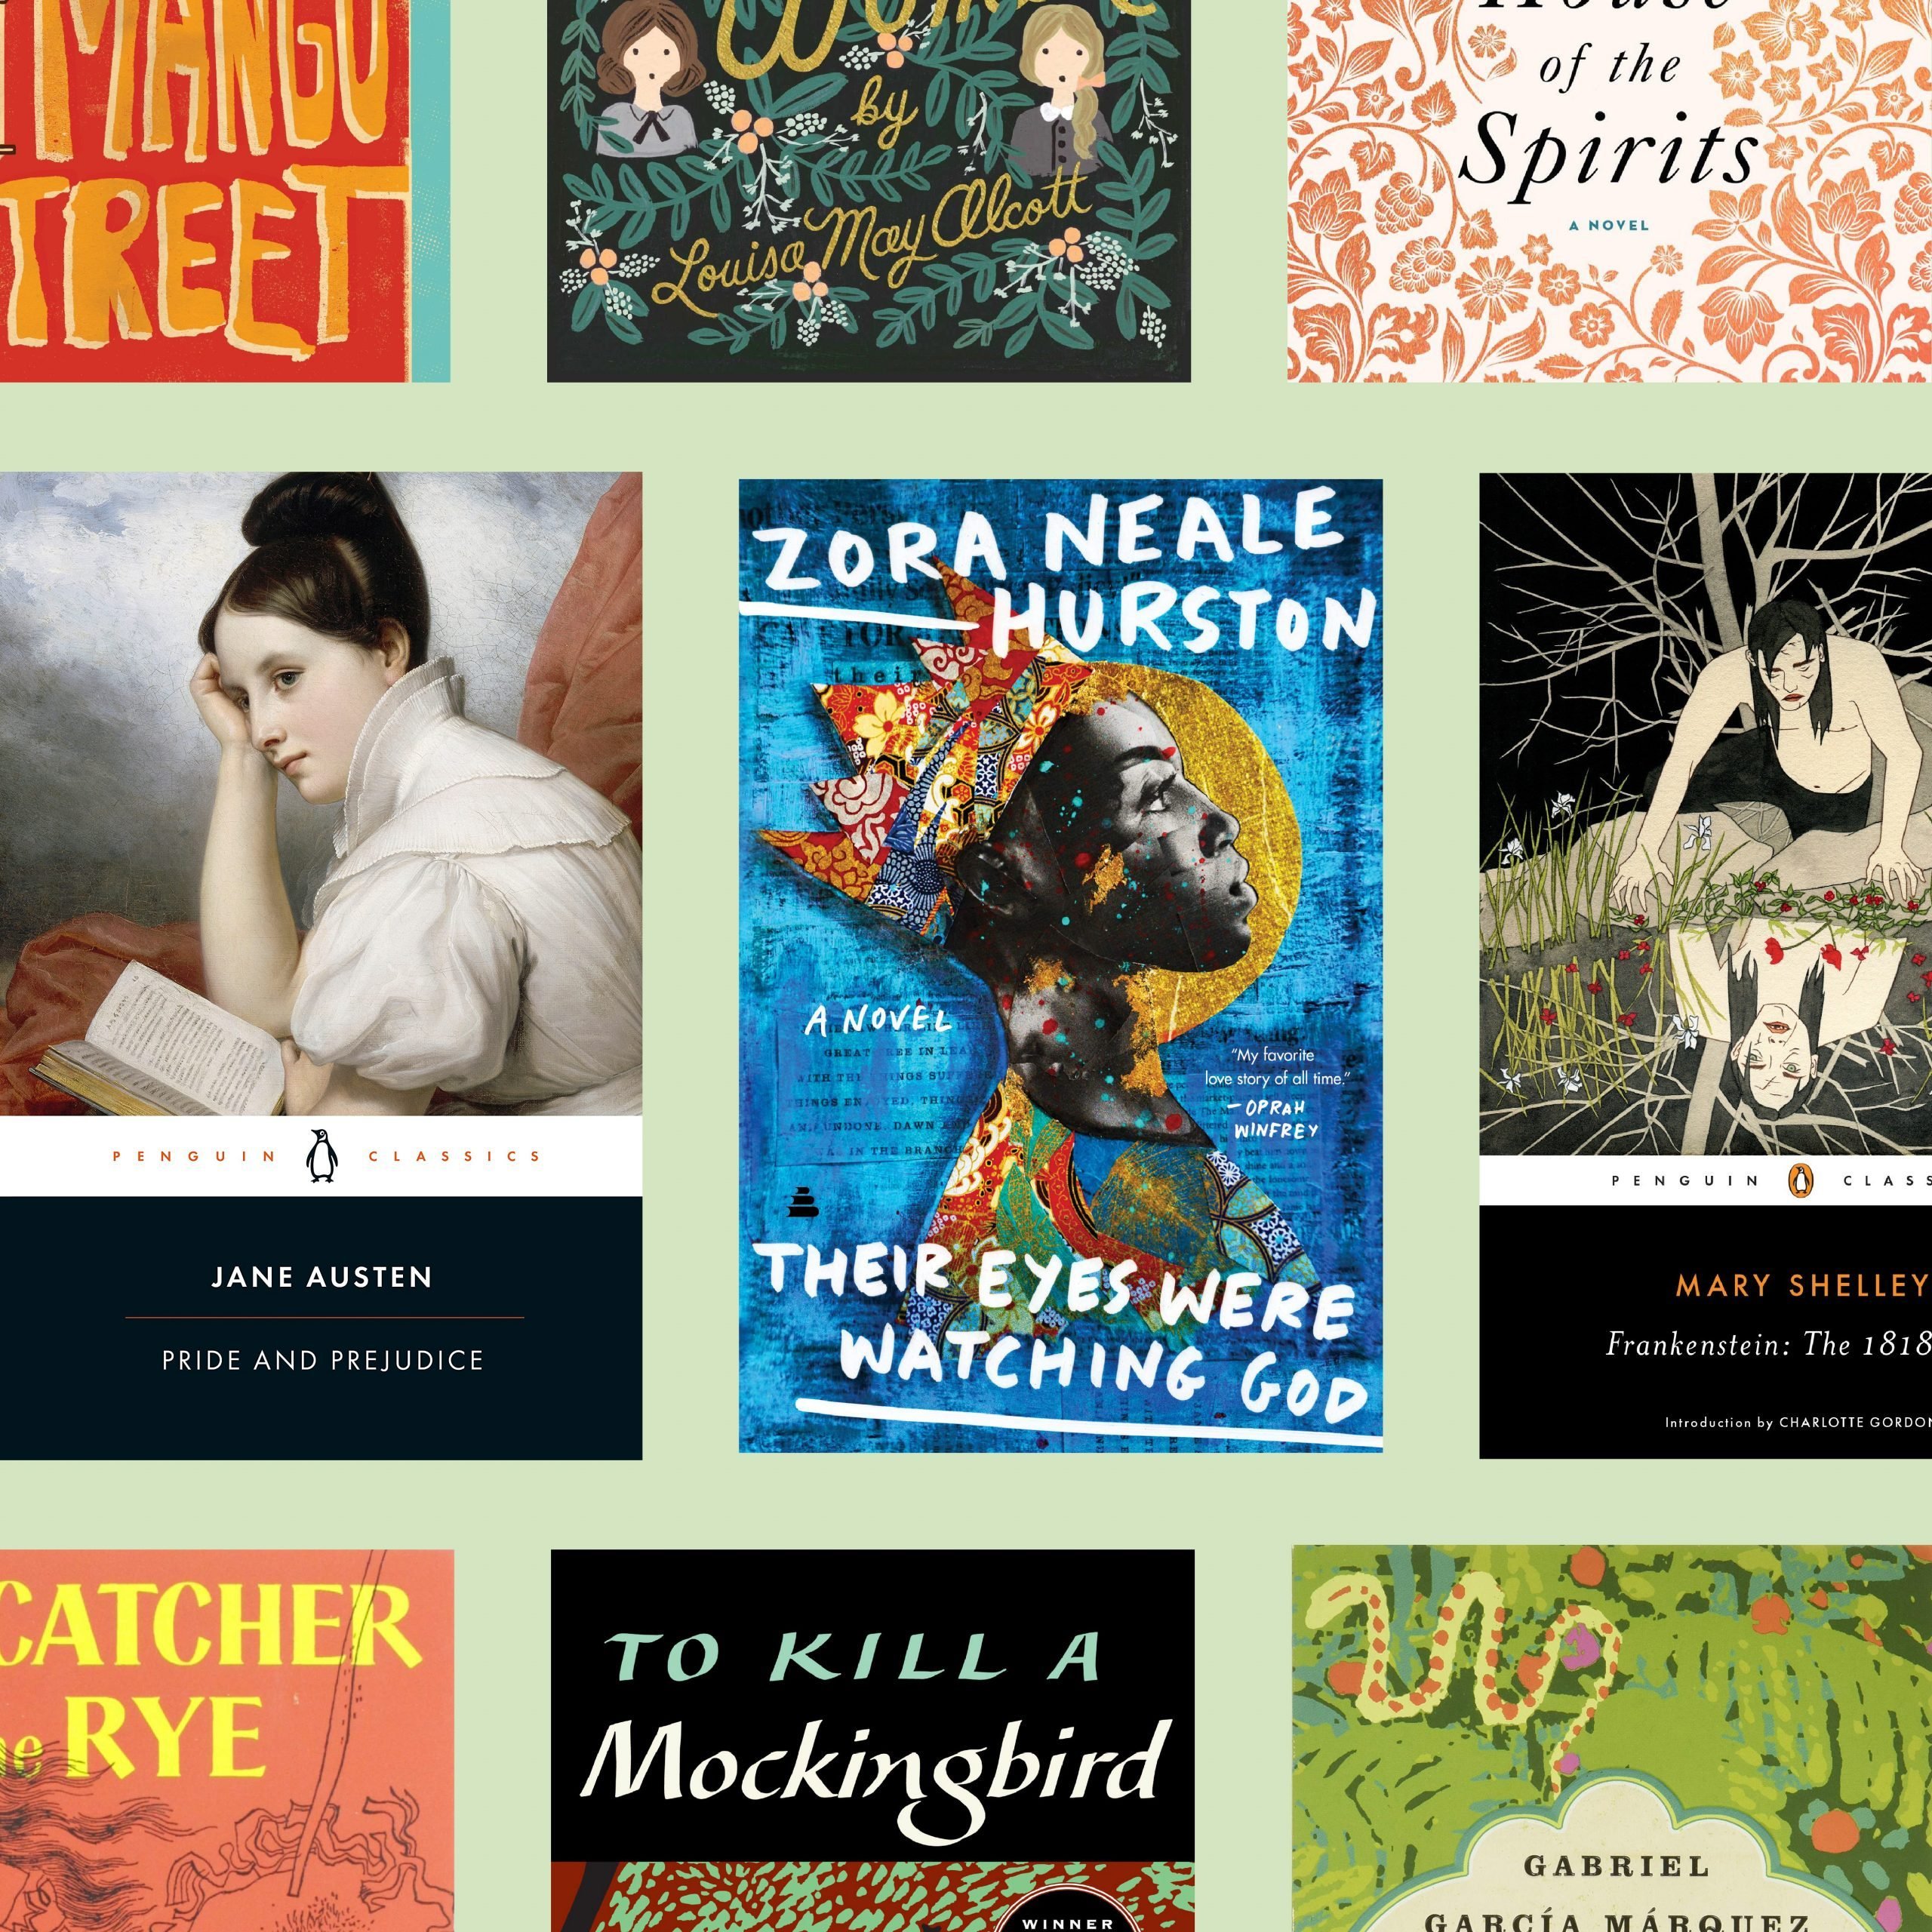 50 Classic Books Everyone Should Read in Their Lifetime